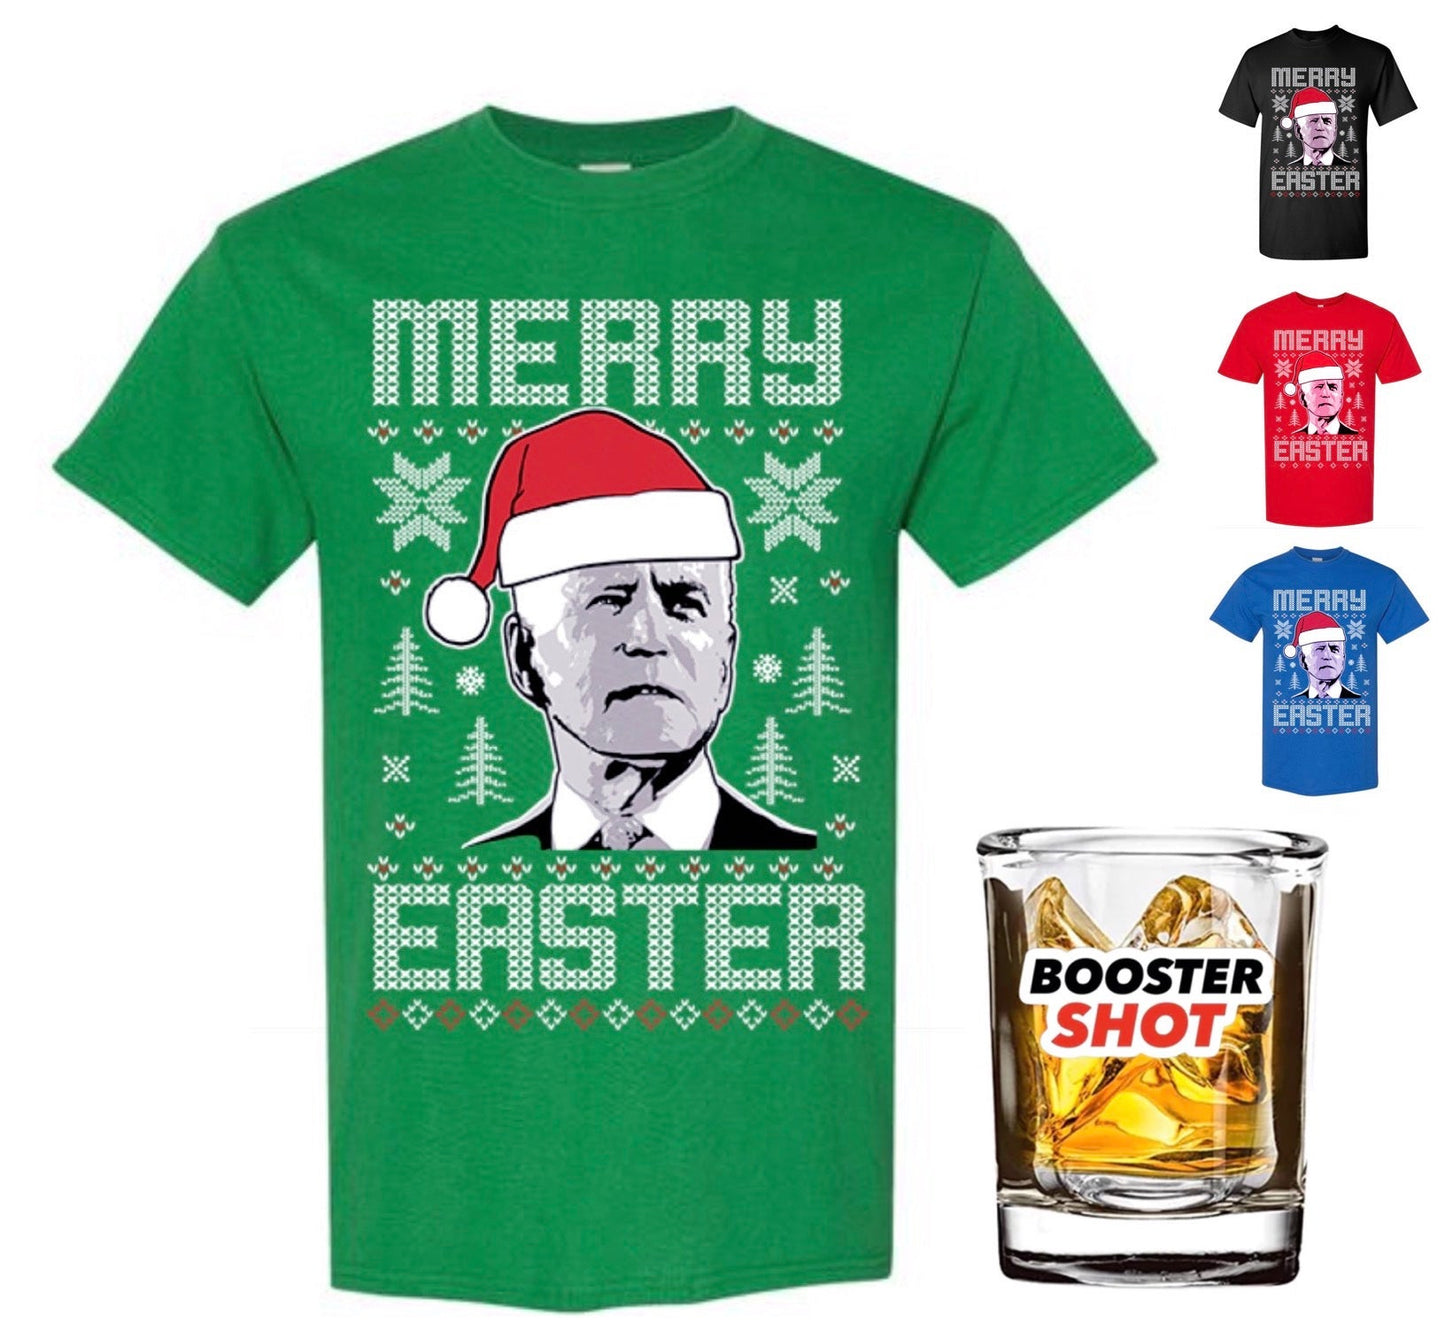 Merry Easter T-shirt (+Free Booster)